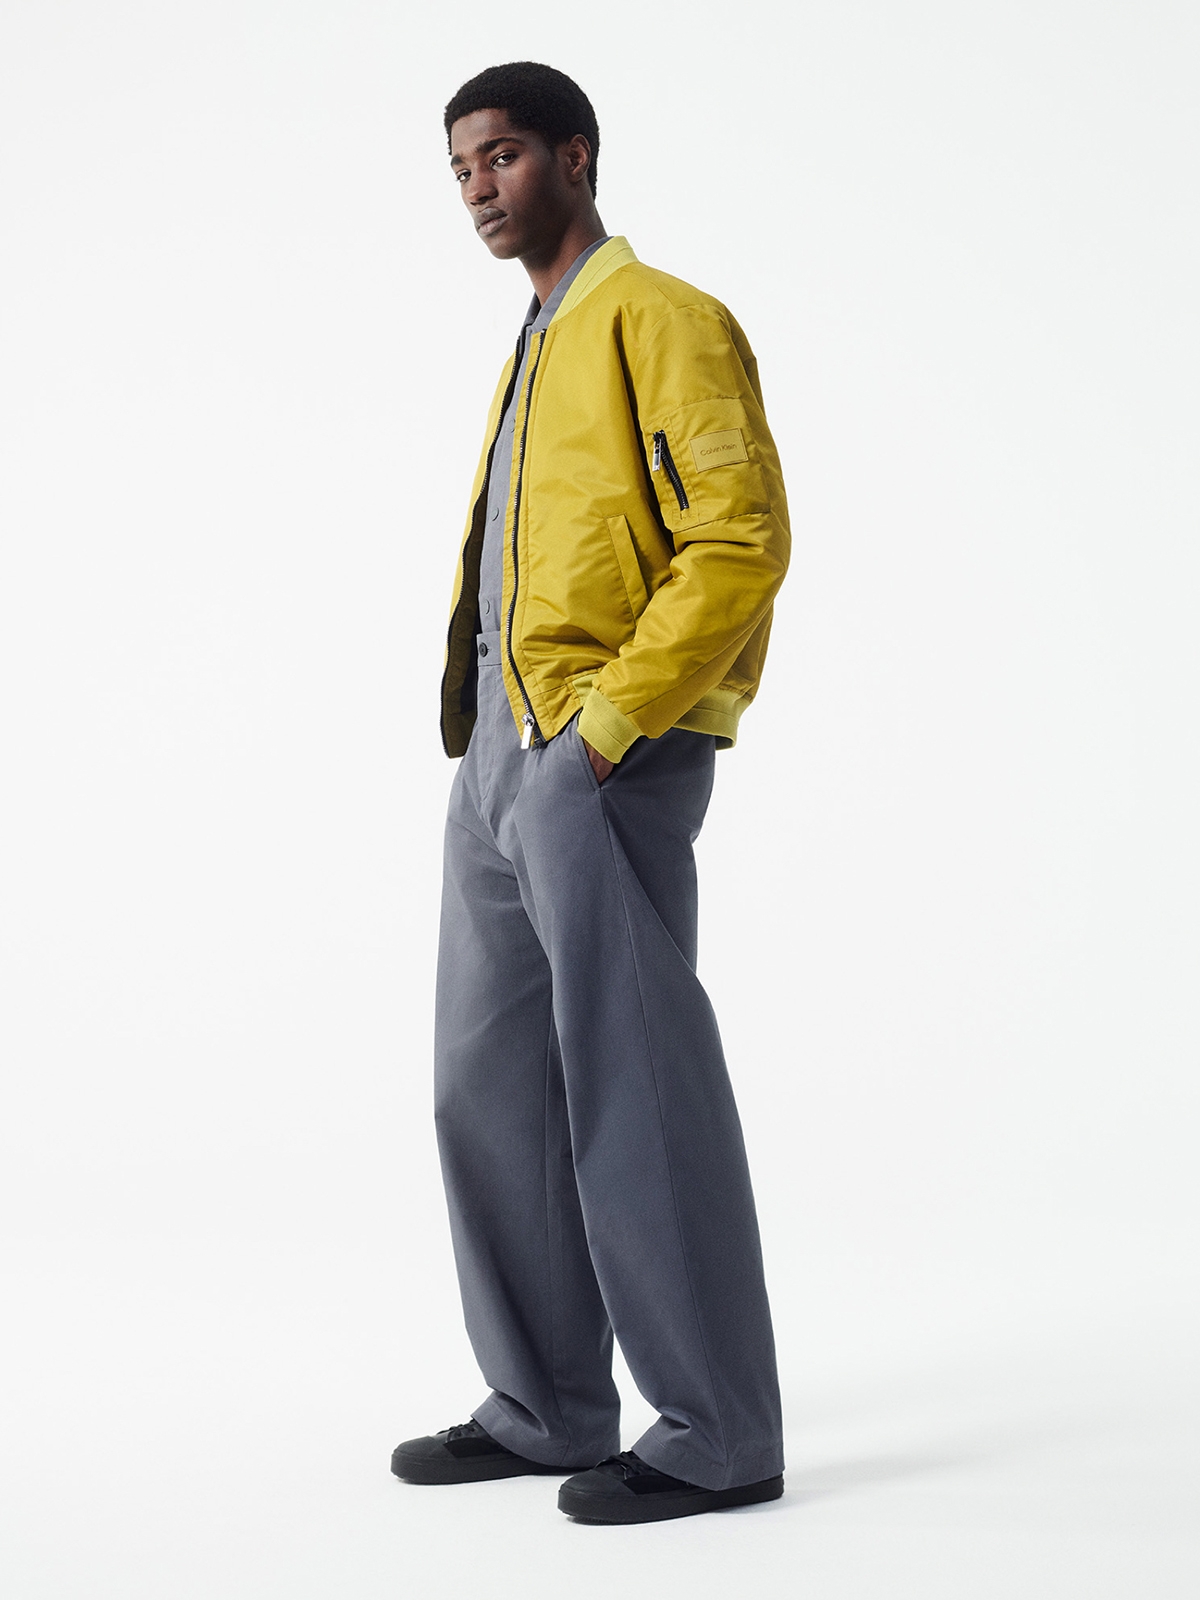 Master the Calvin Klein Style: Fashion Tips and Insights - Yellowbrick